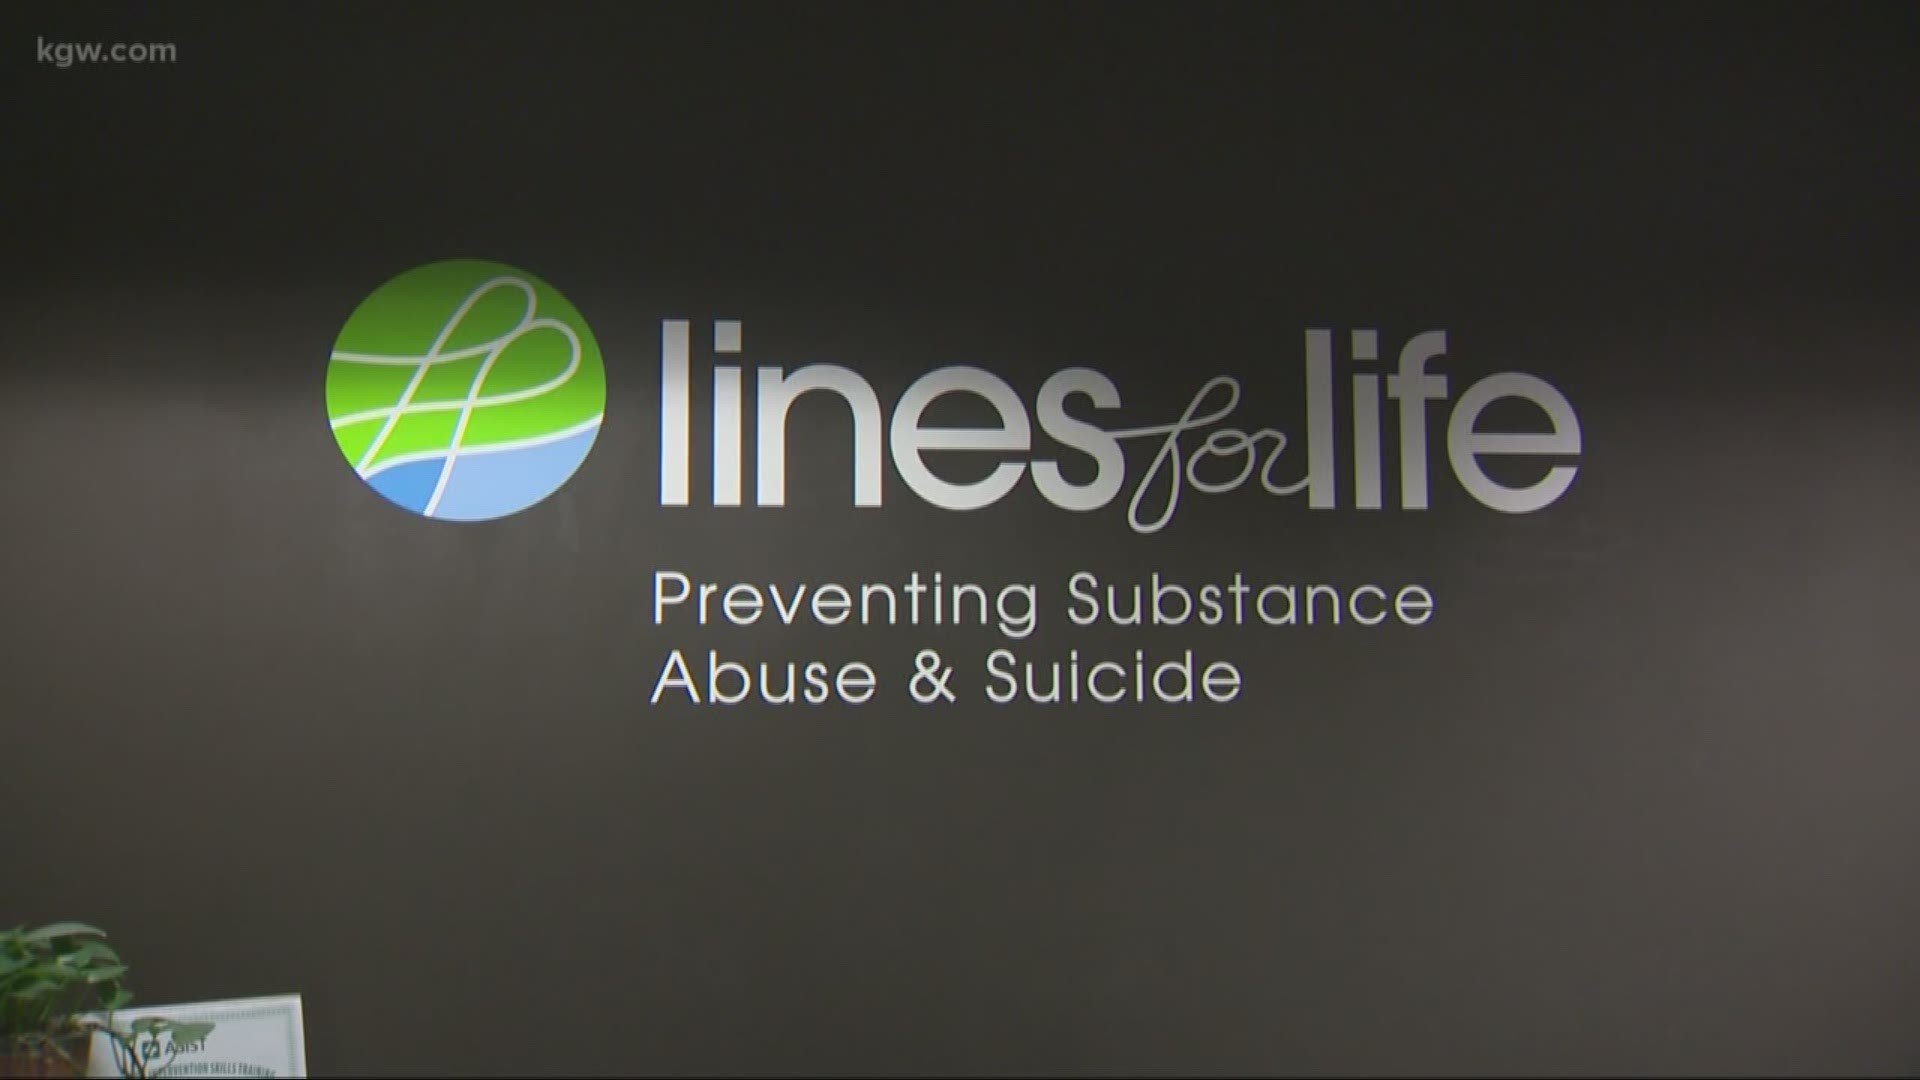 Recent high-profile suicides are highlighting the importance of prevention and the help available to those who need it.